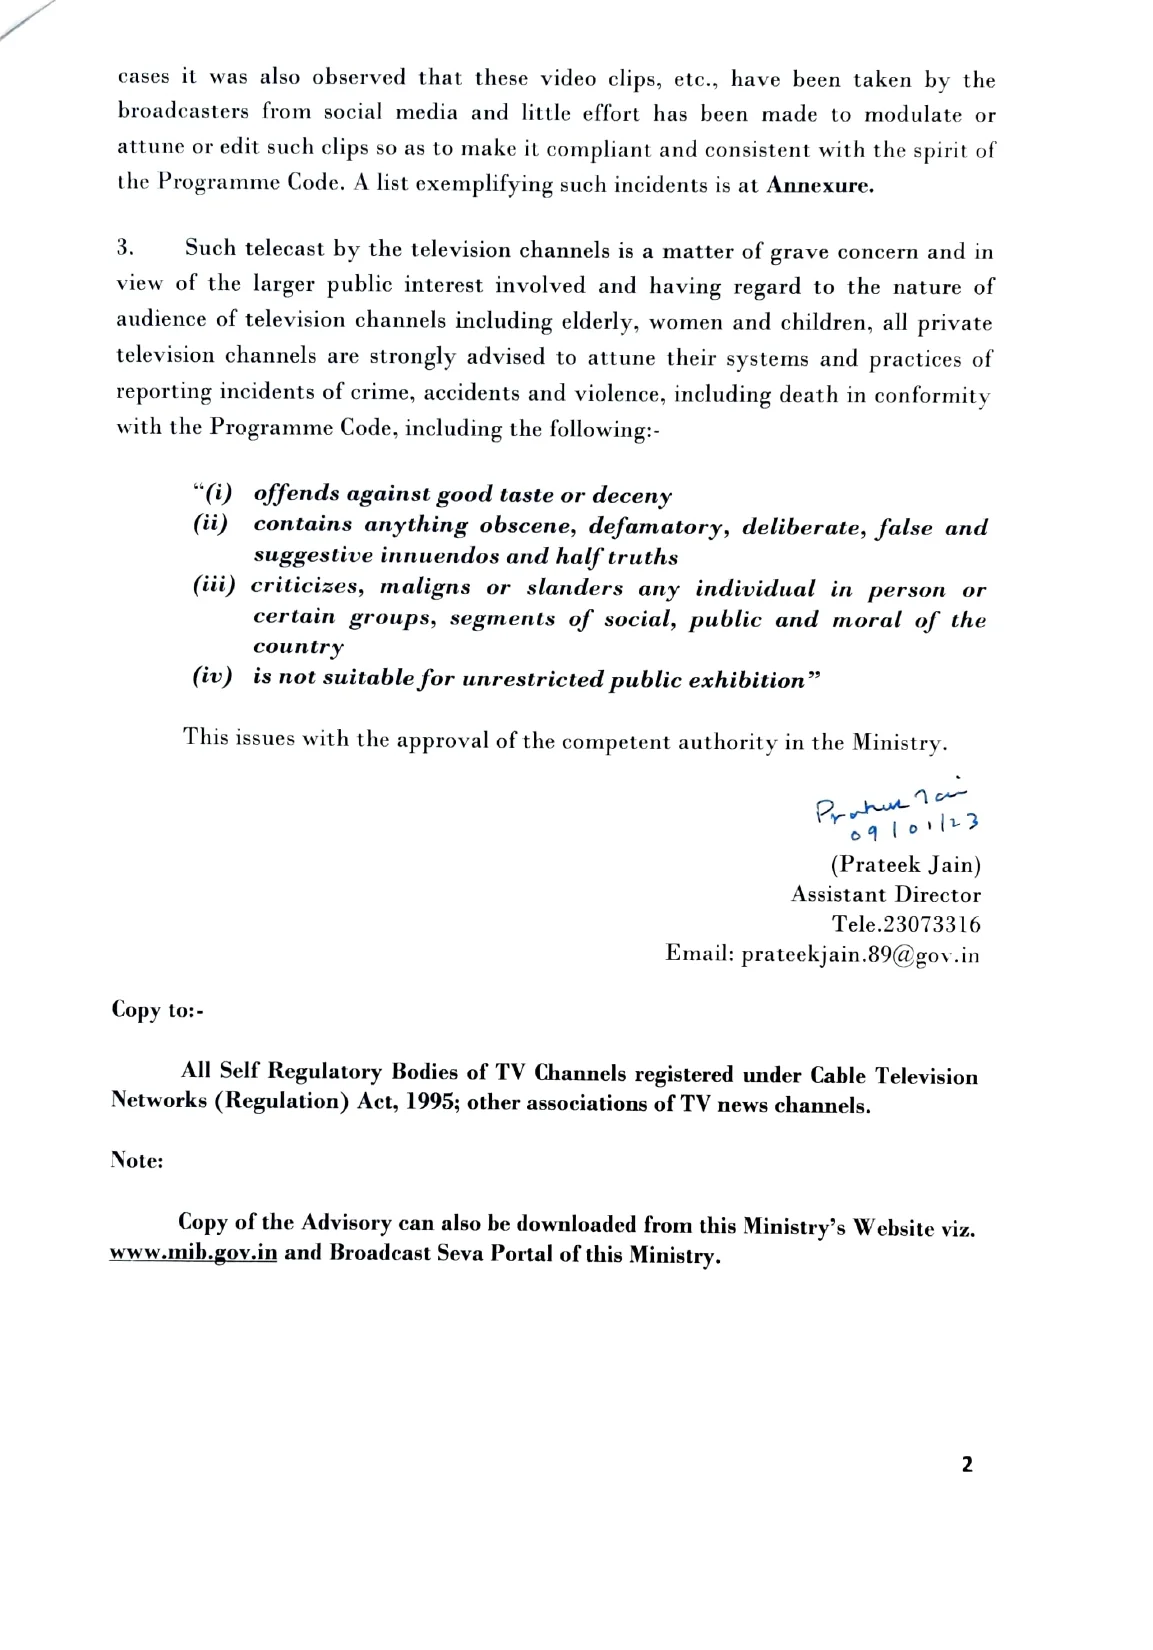 Advisory to Private TV channels 09.01.23 page 0002